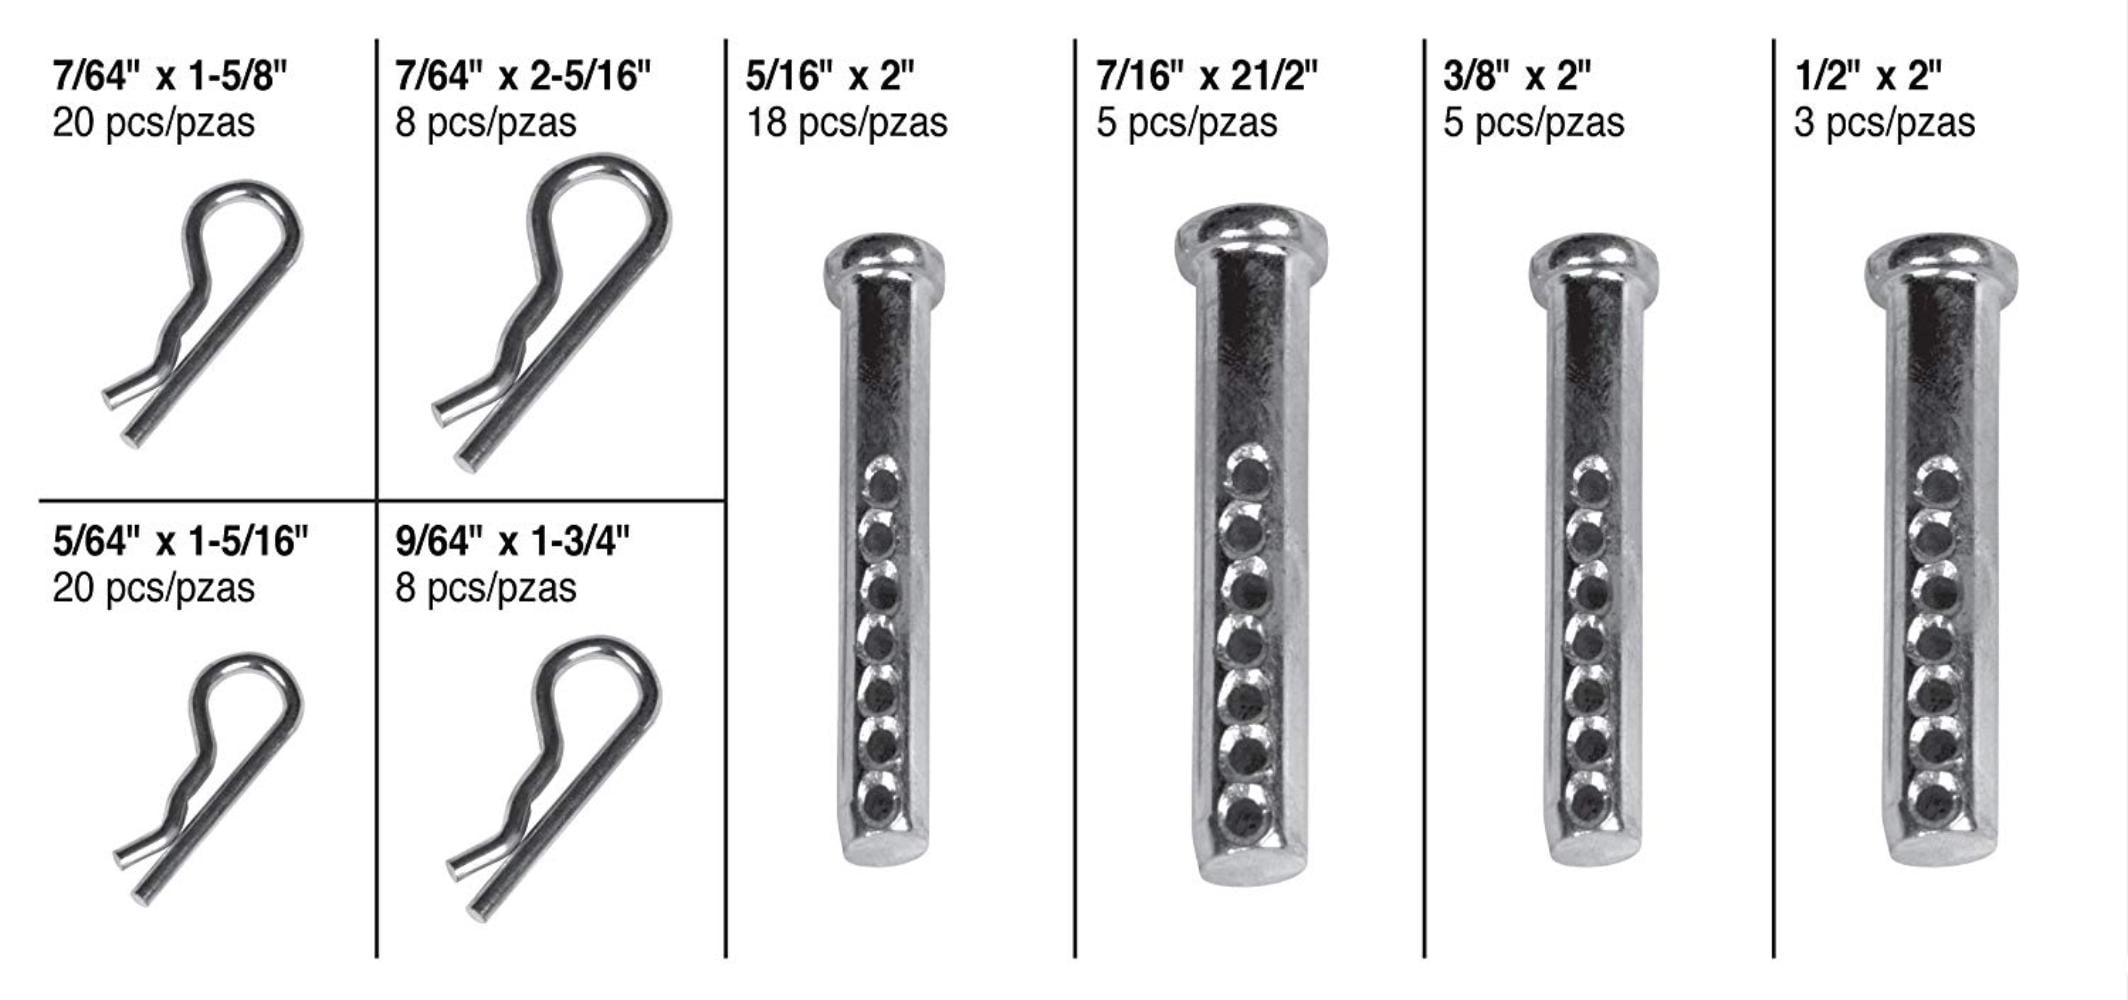 Pack of 400 pcs Clevis Pin 5/16" x 7/8" Carbon Steel Zinc Plated 